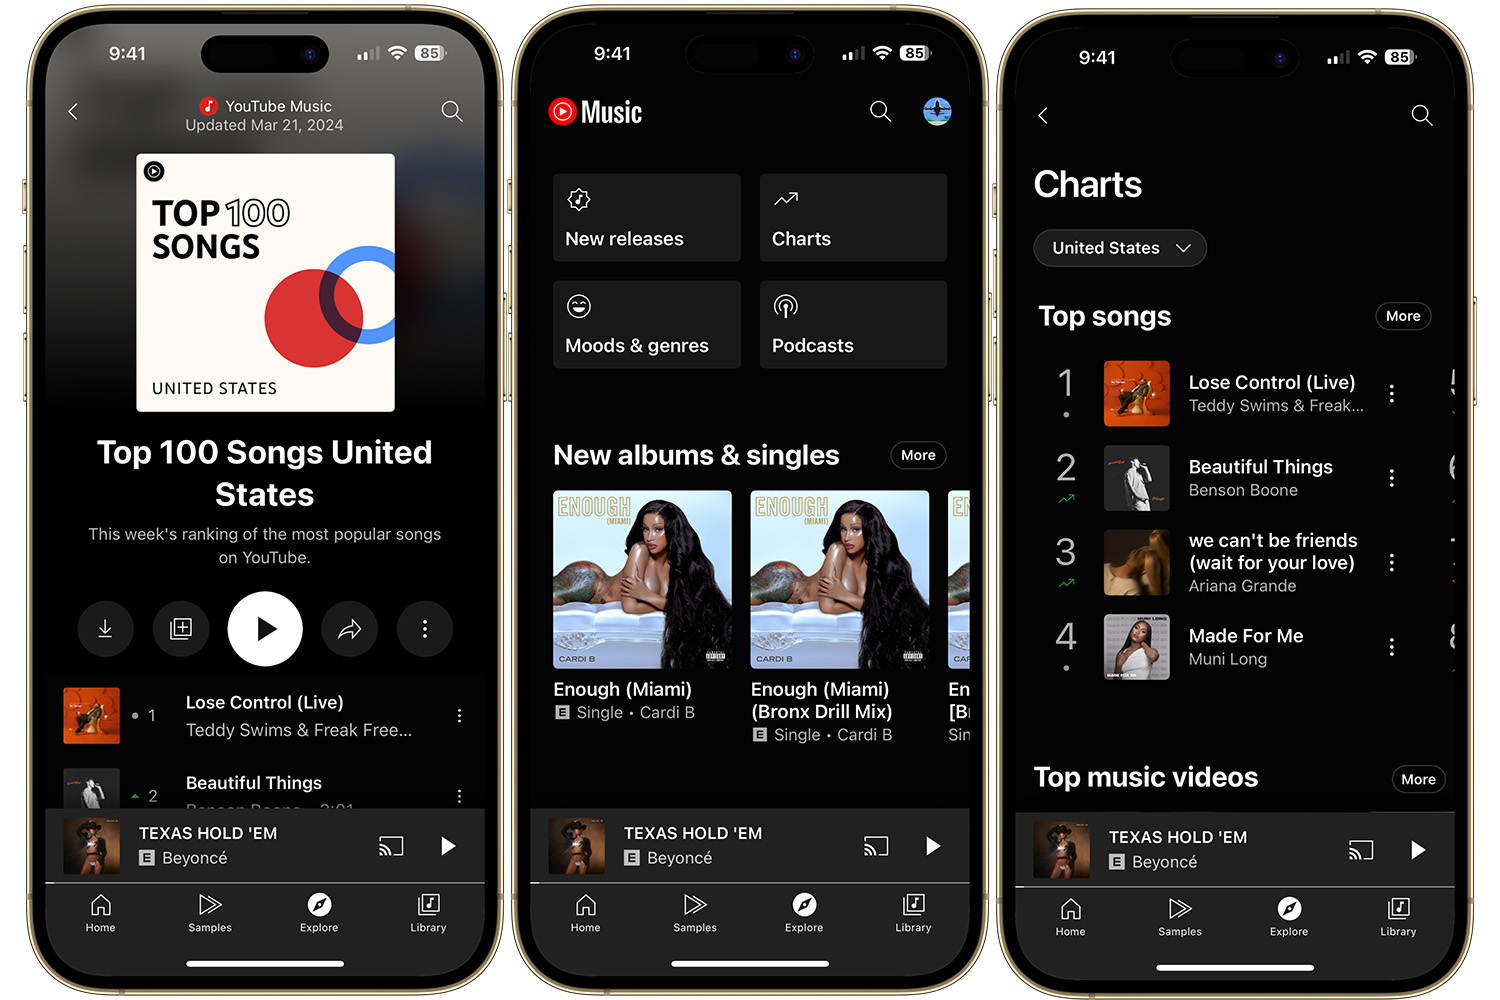 YouTube Music app on iPhone 15 Pro Max.